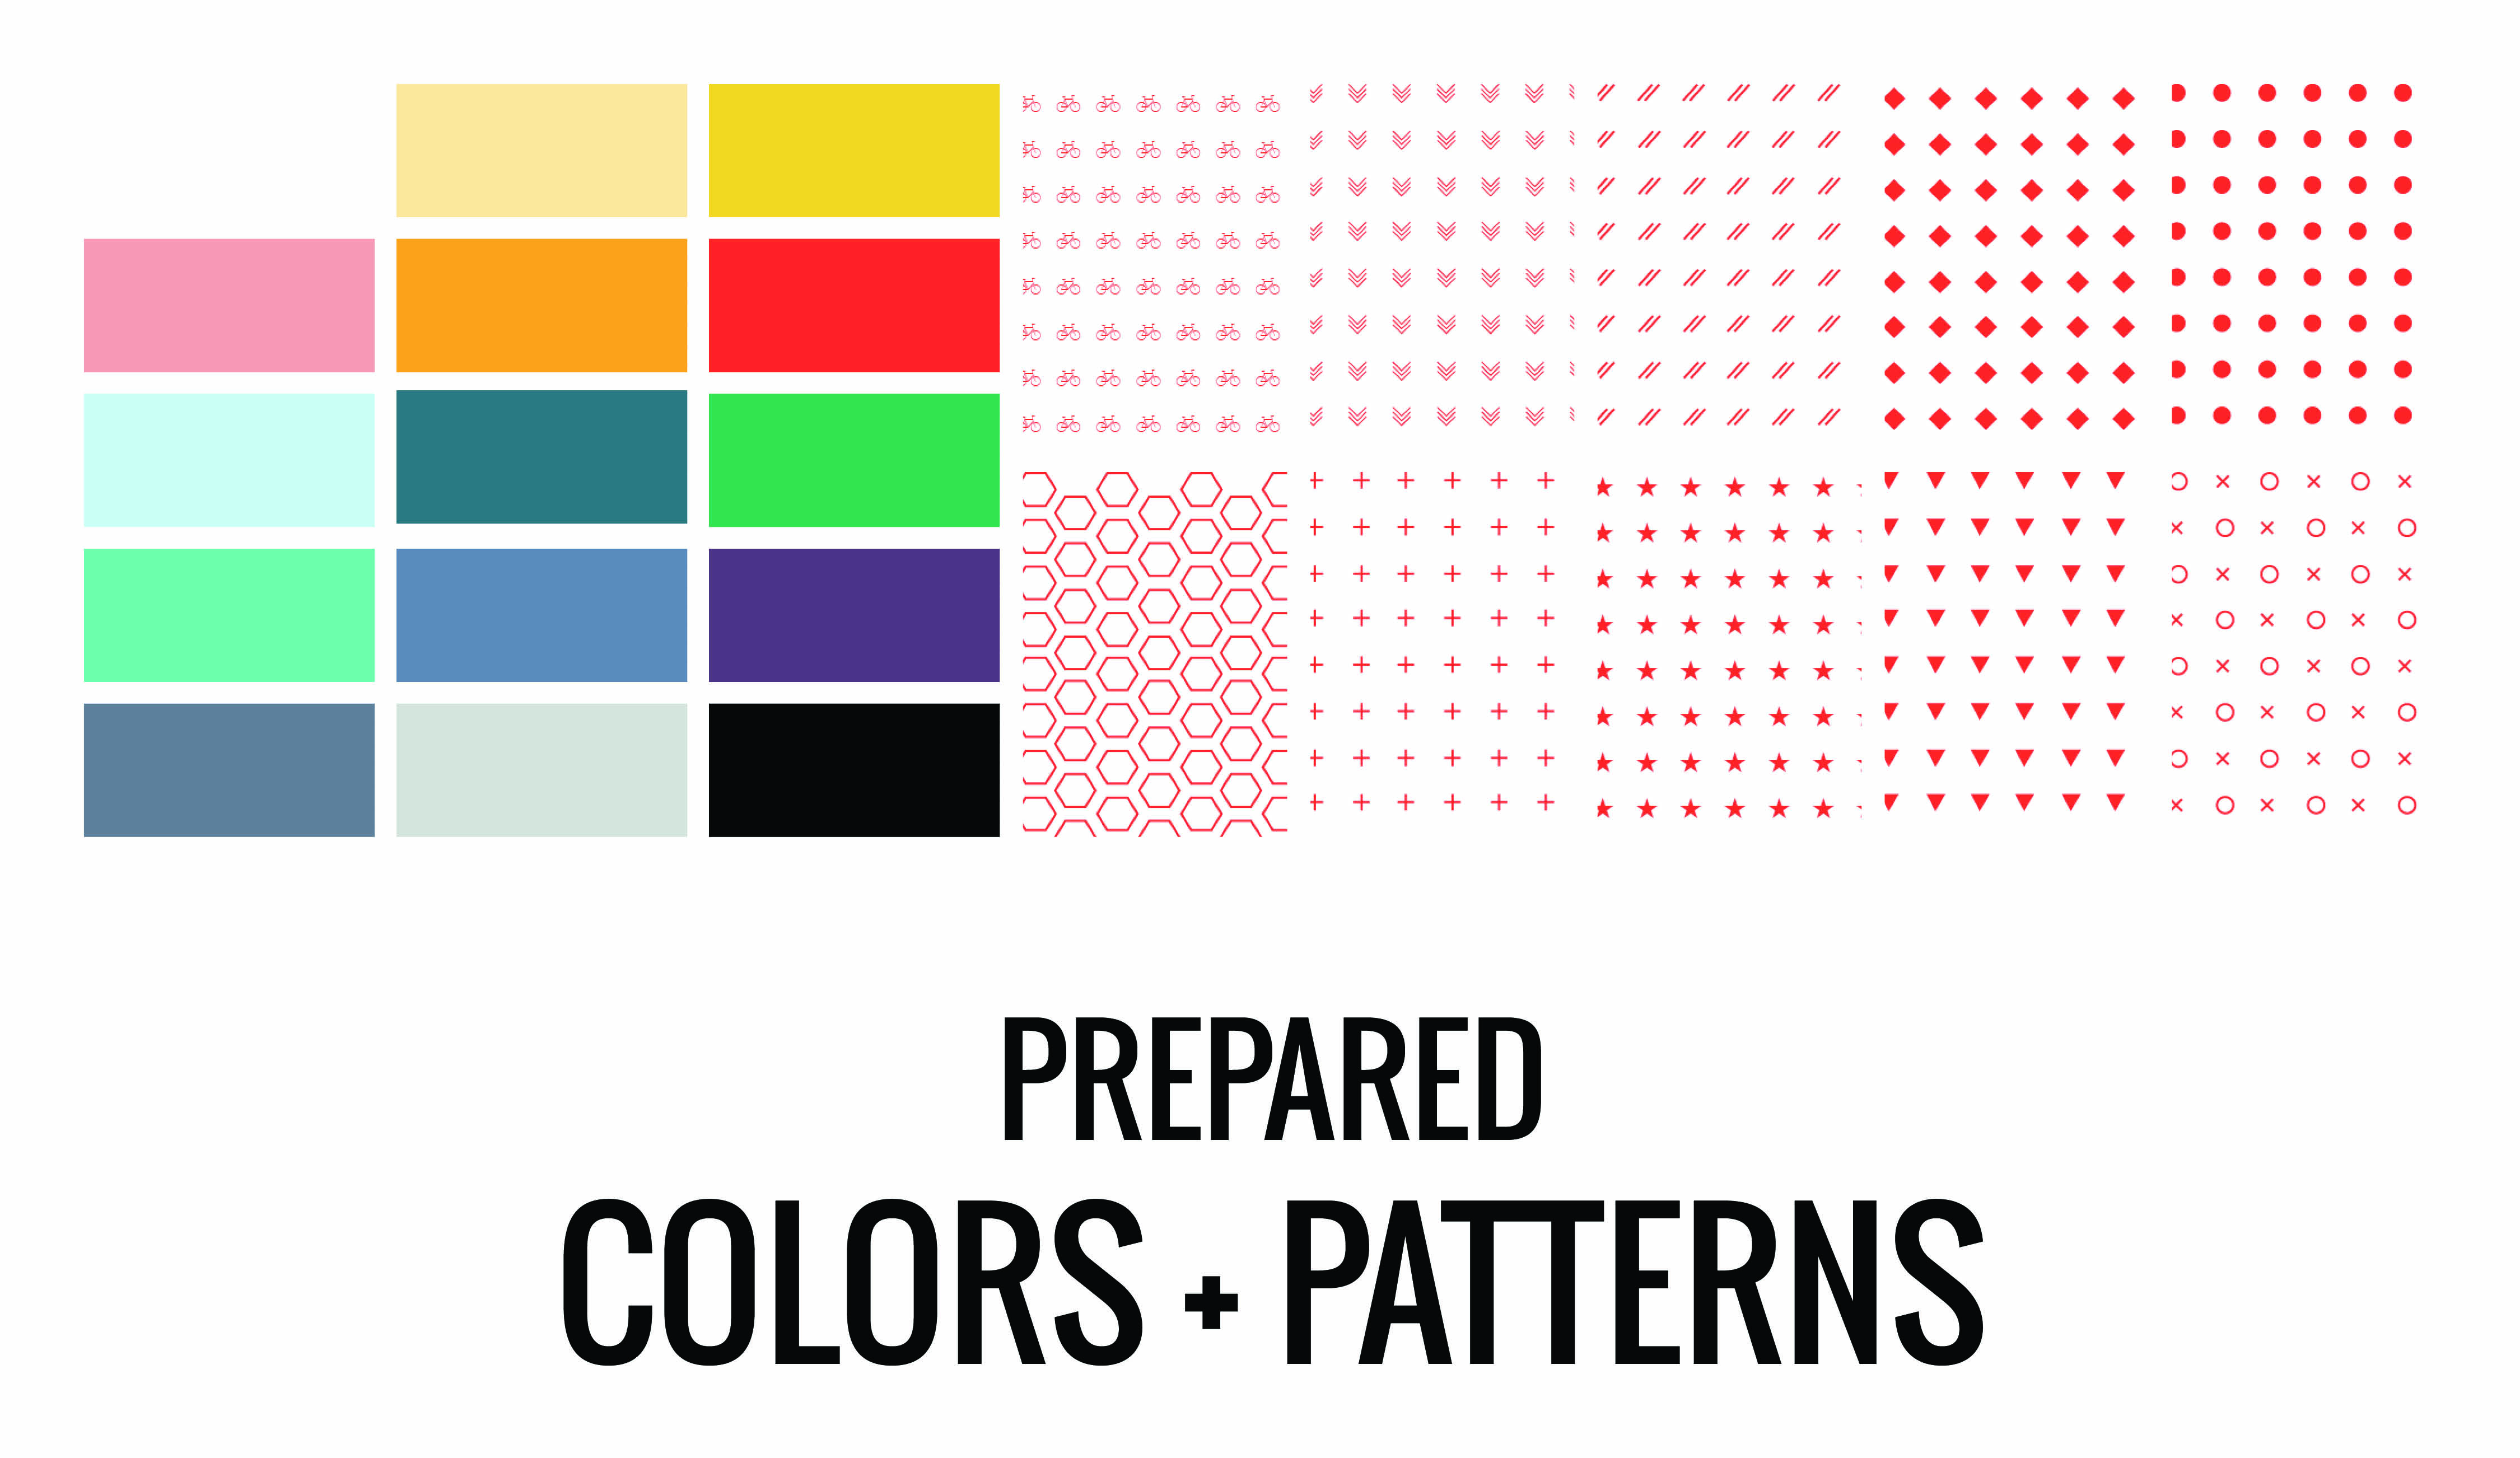 All colors and patterns included in the template